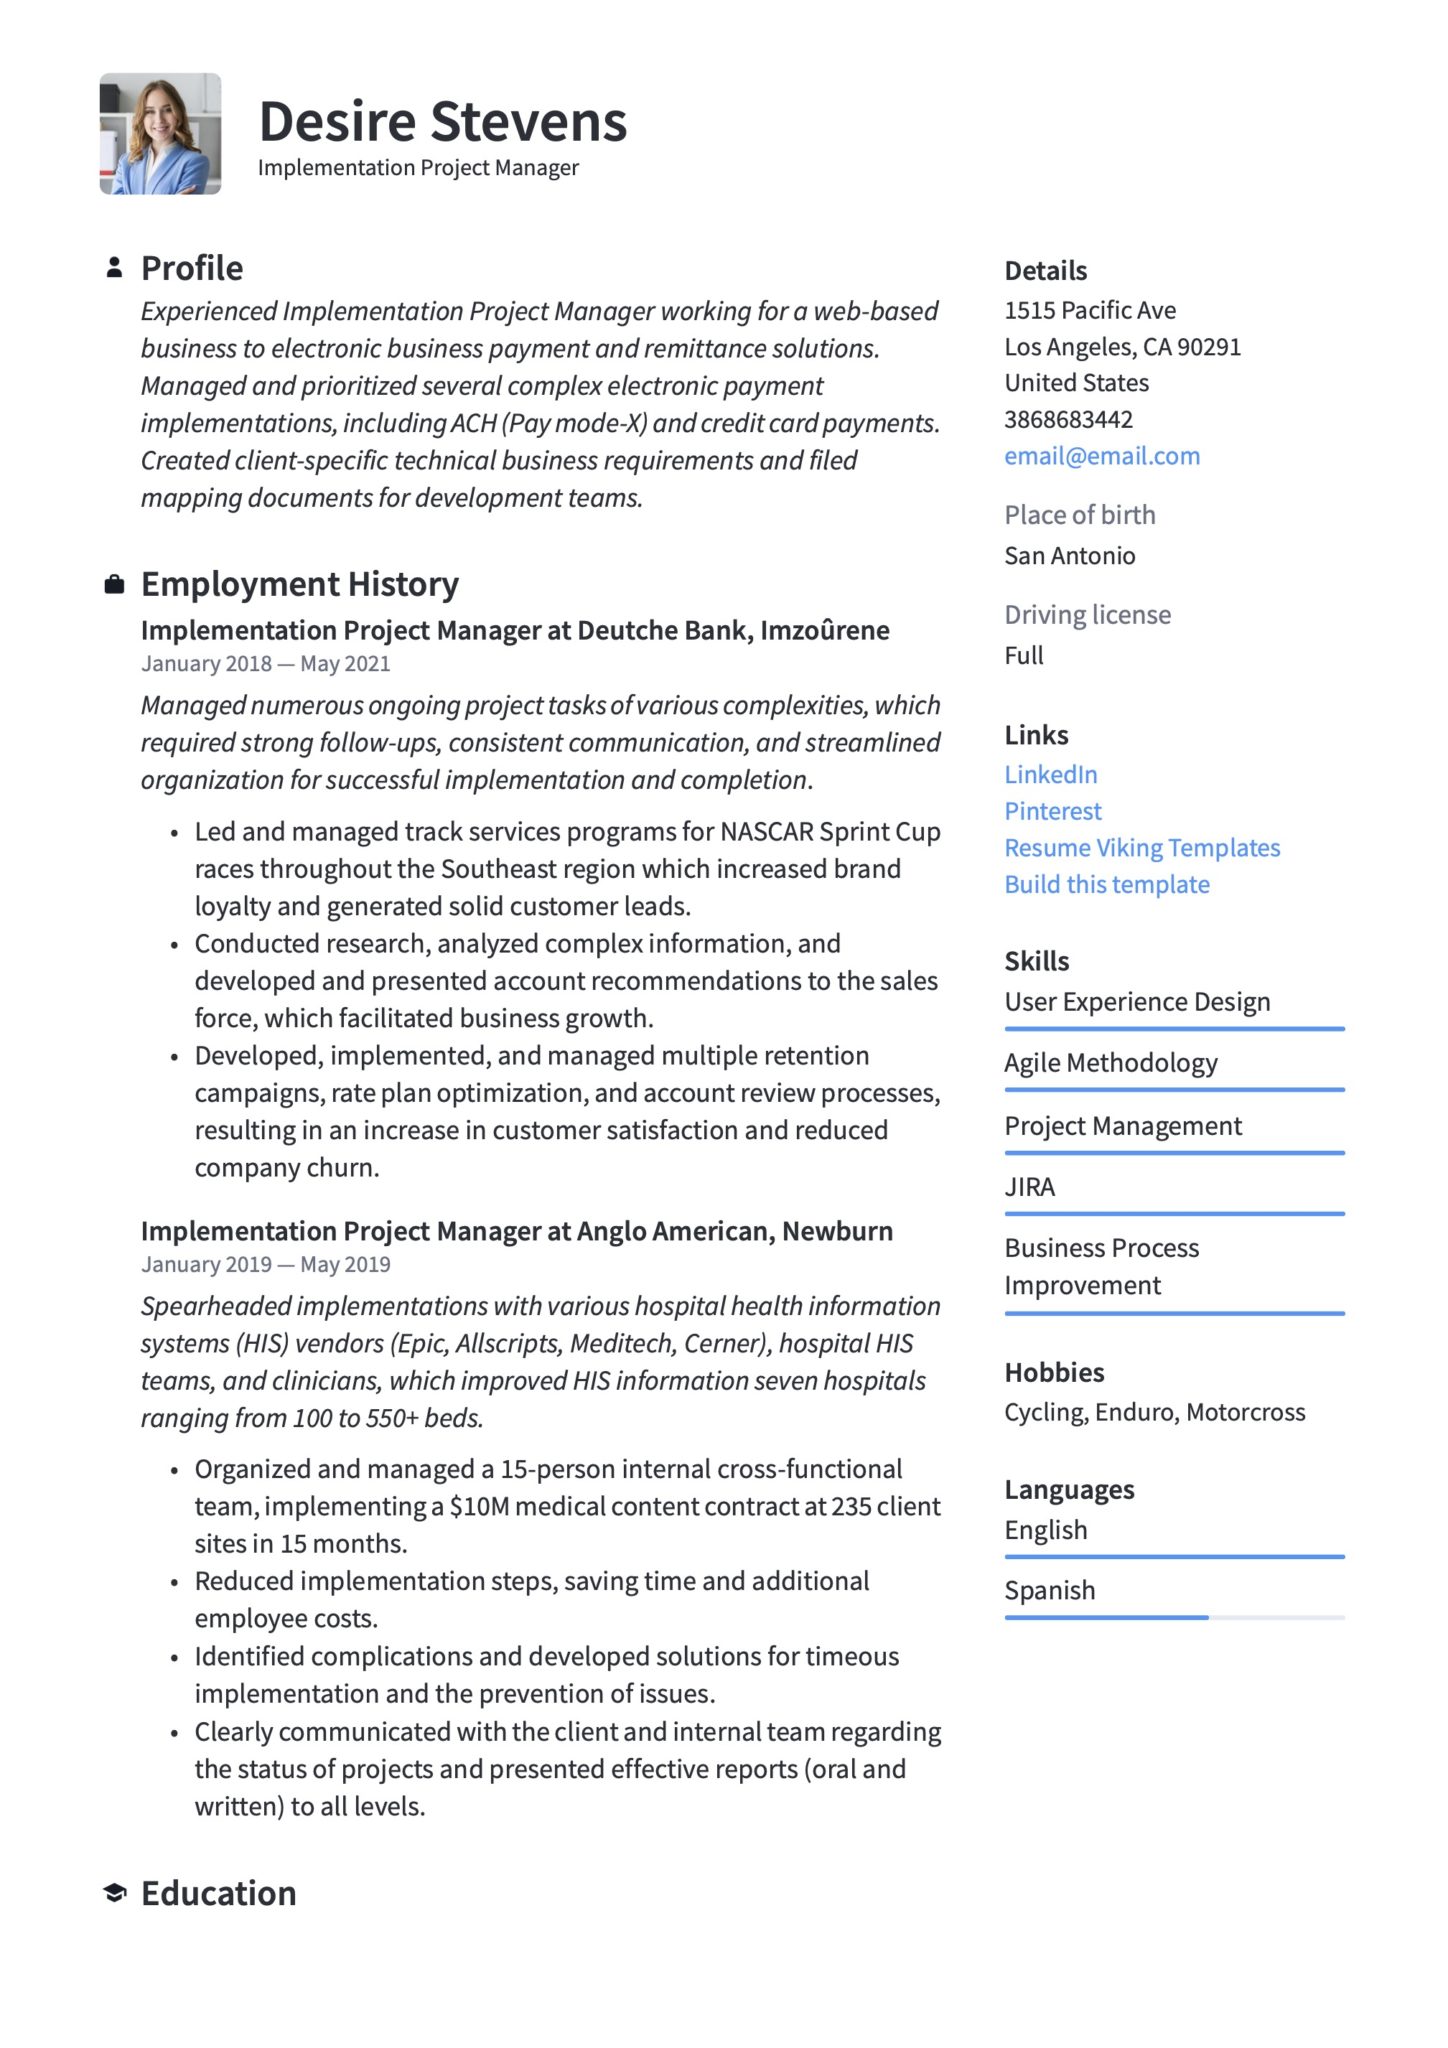 Professional Implementation Project Manager Resume Template